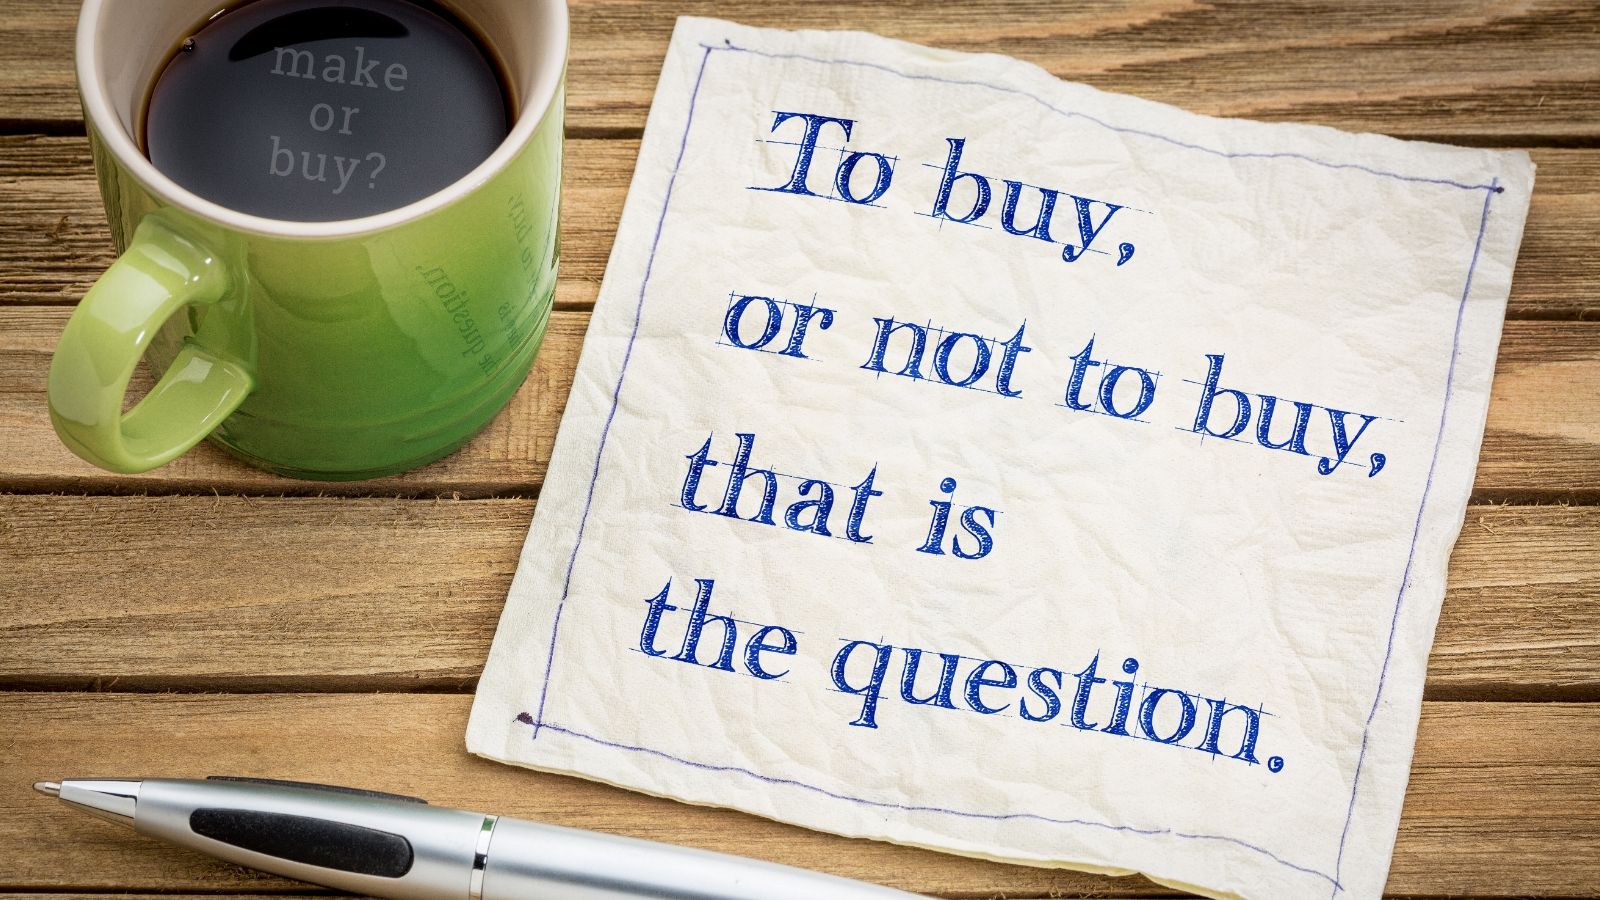 Make or Buy - An essential decision with a high impact.